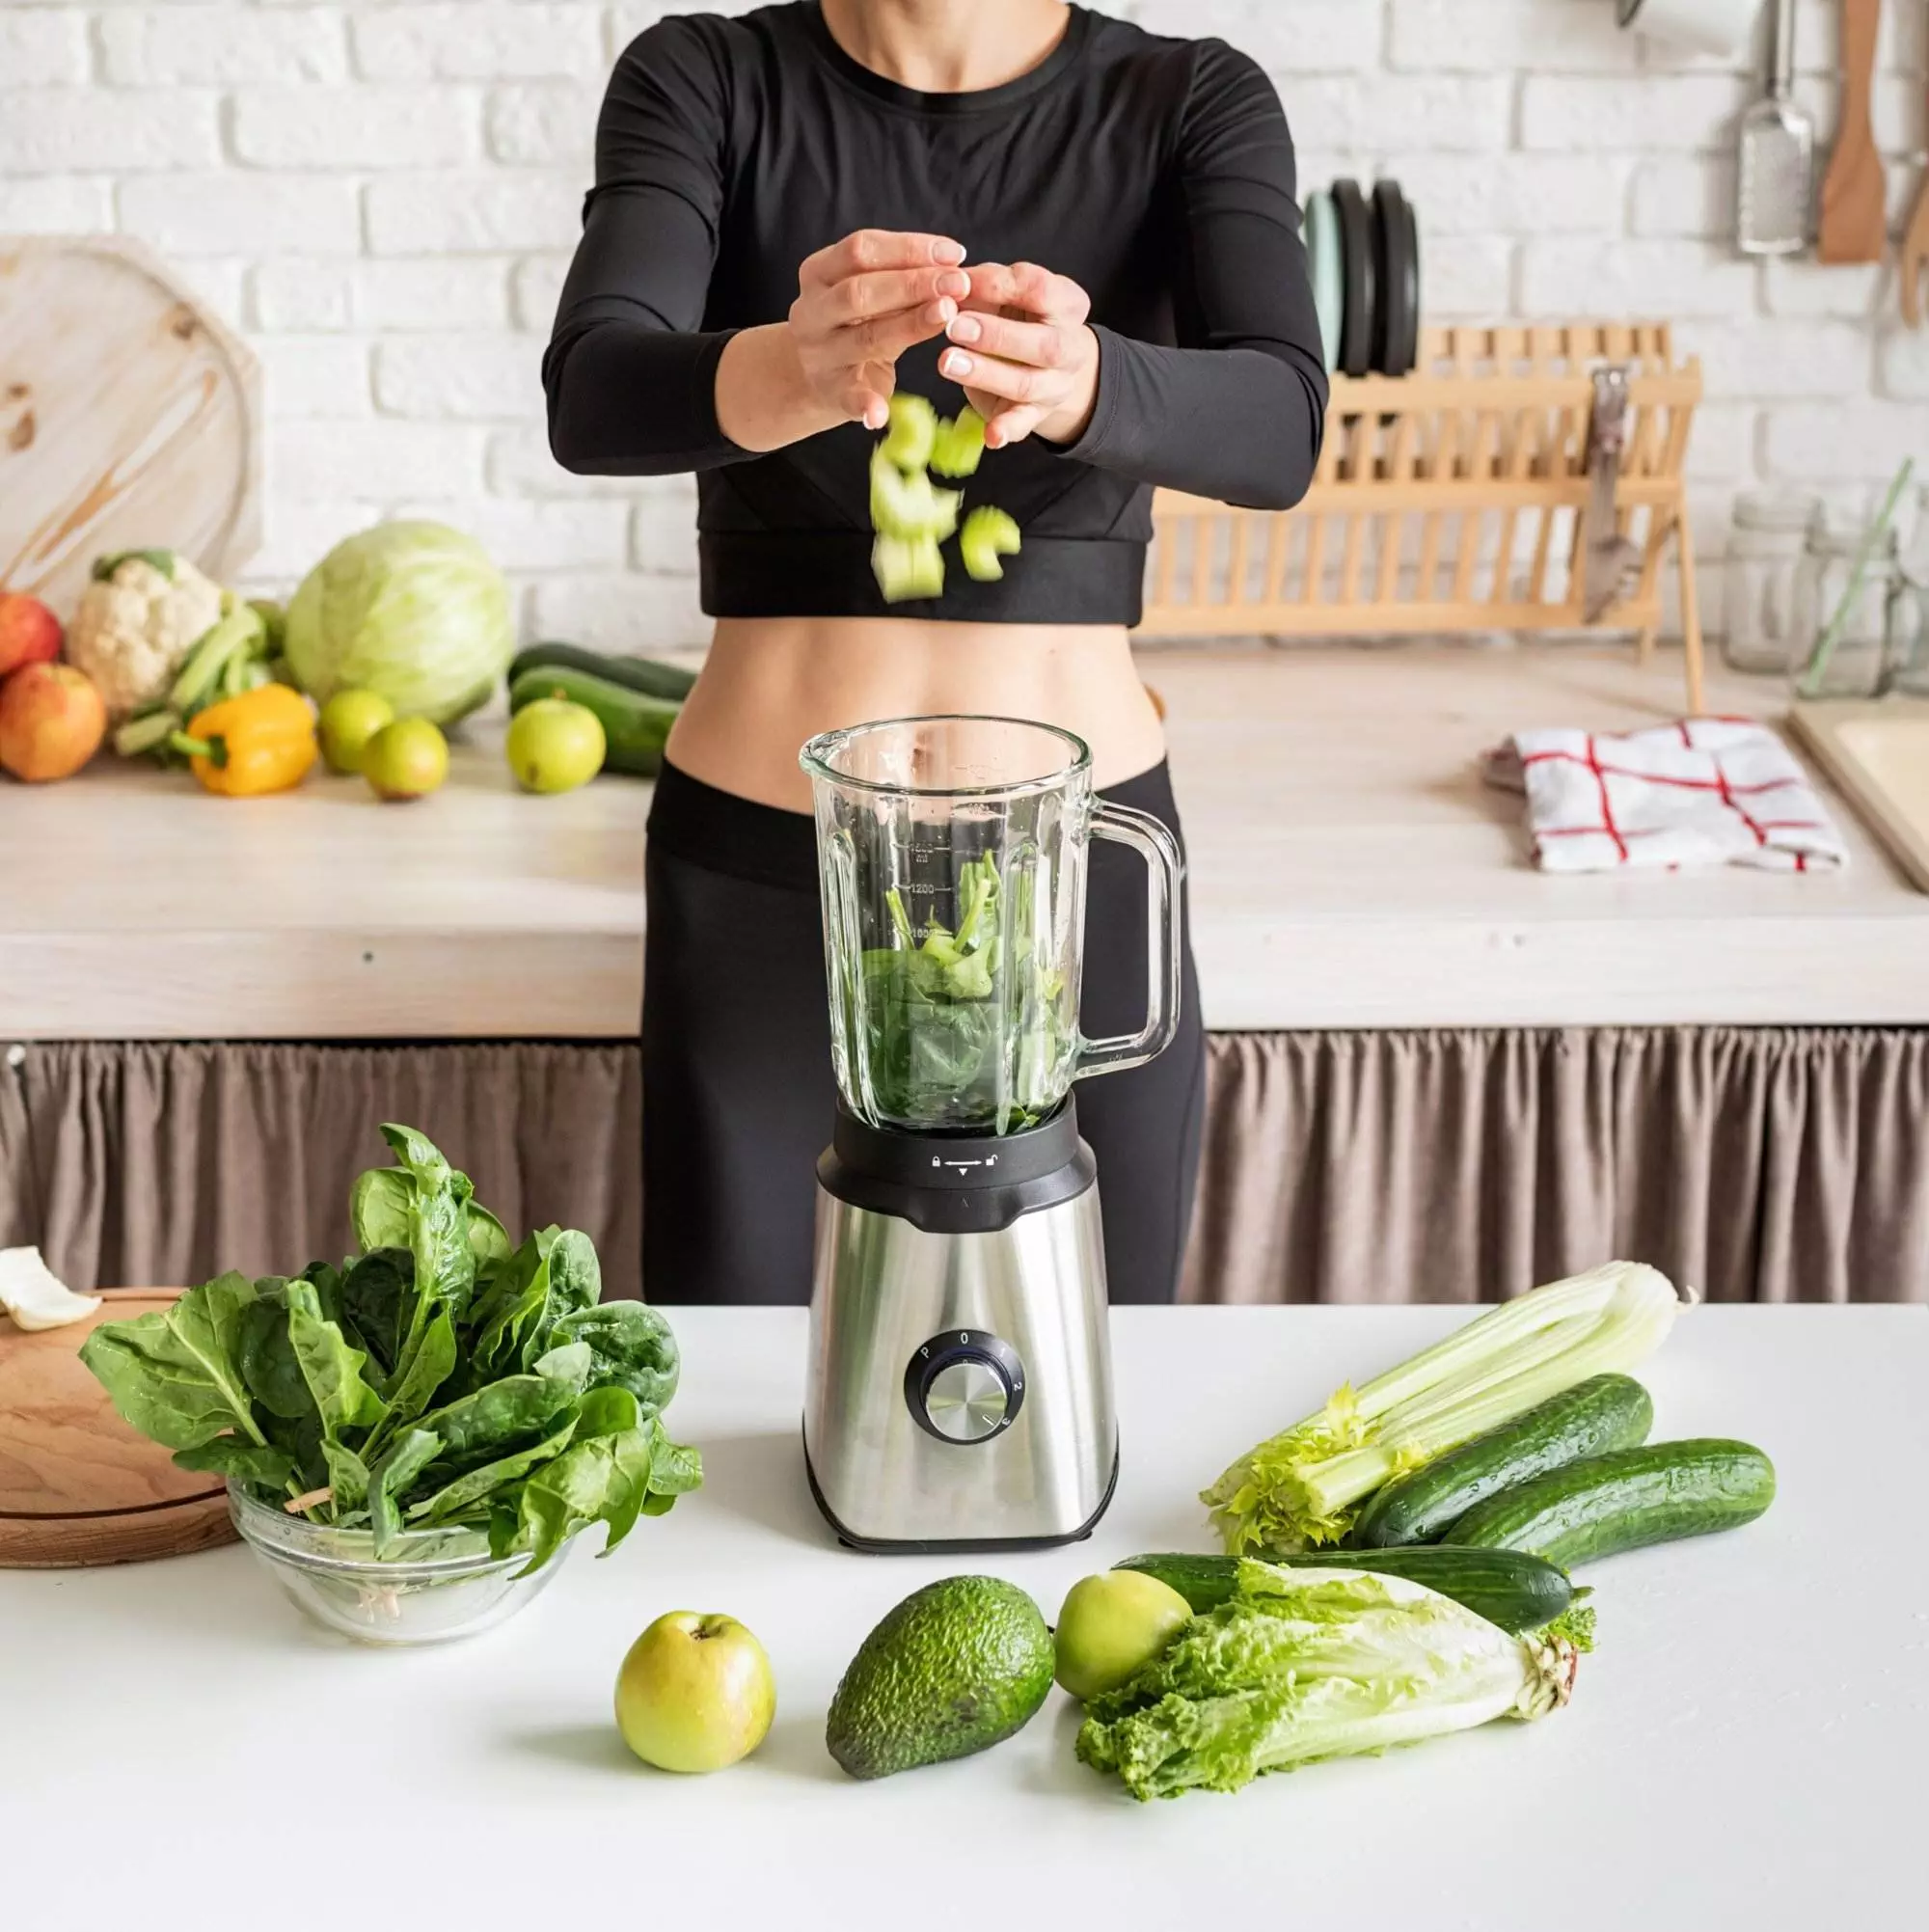 Woman making green smoothie with fresh vegetables.